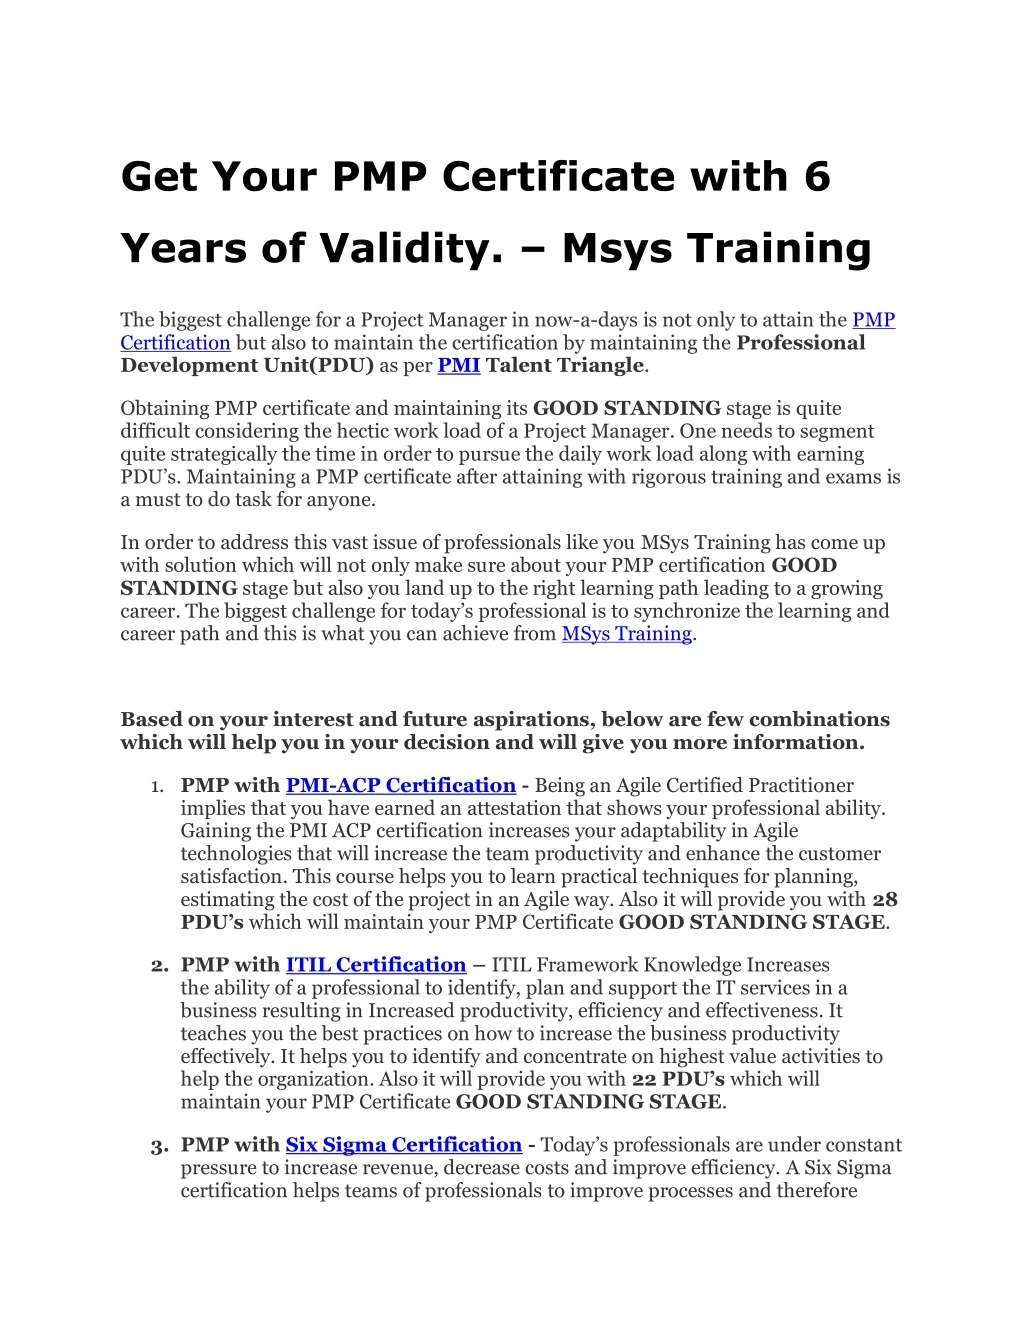 get your pmp certificate with 6